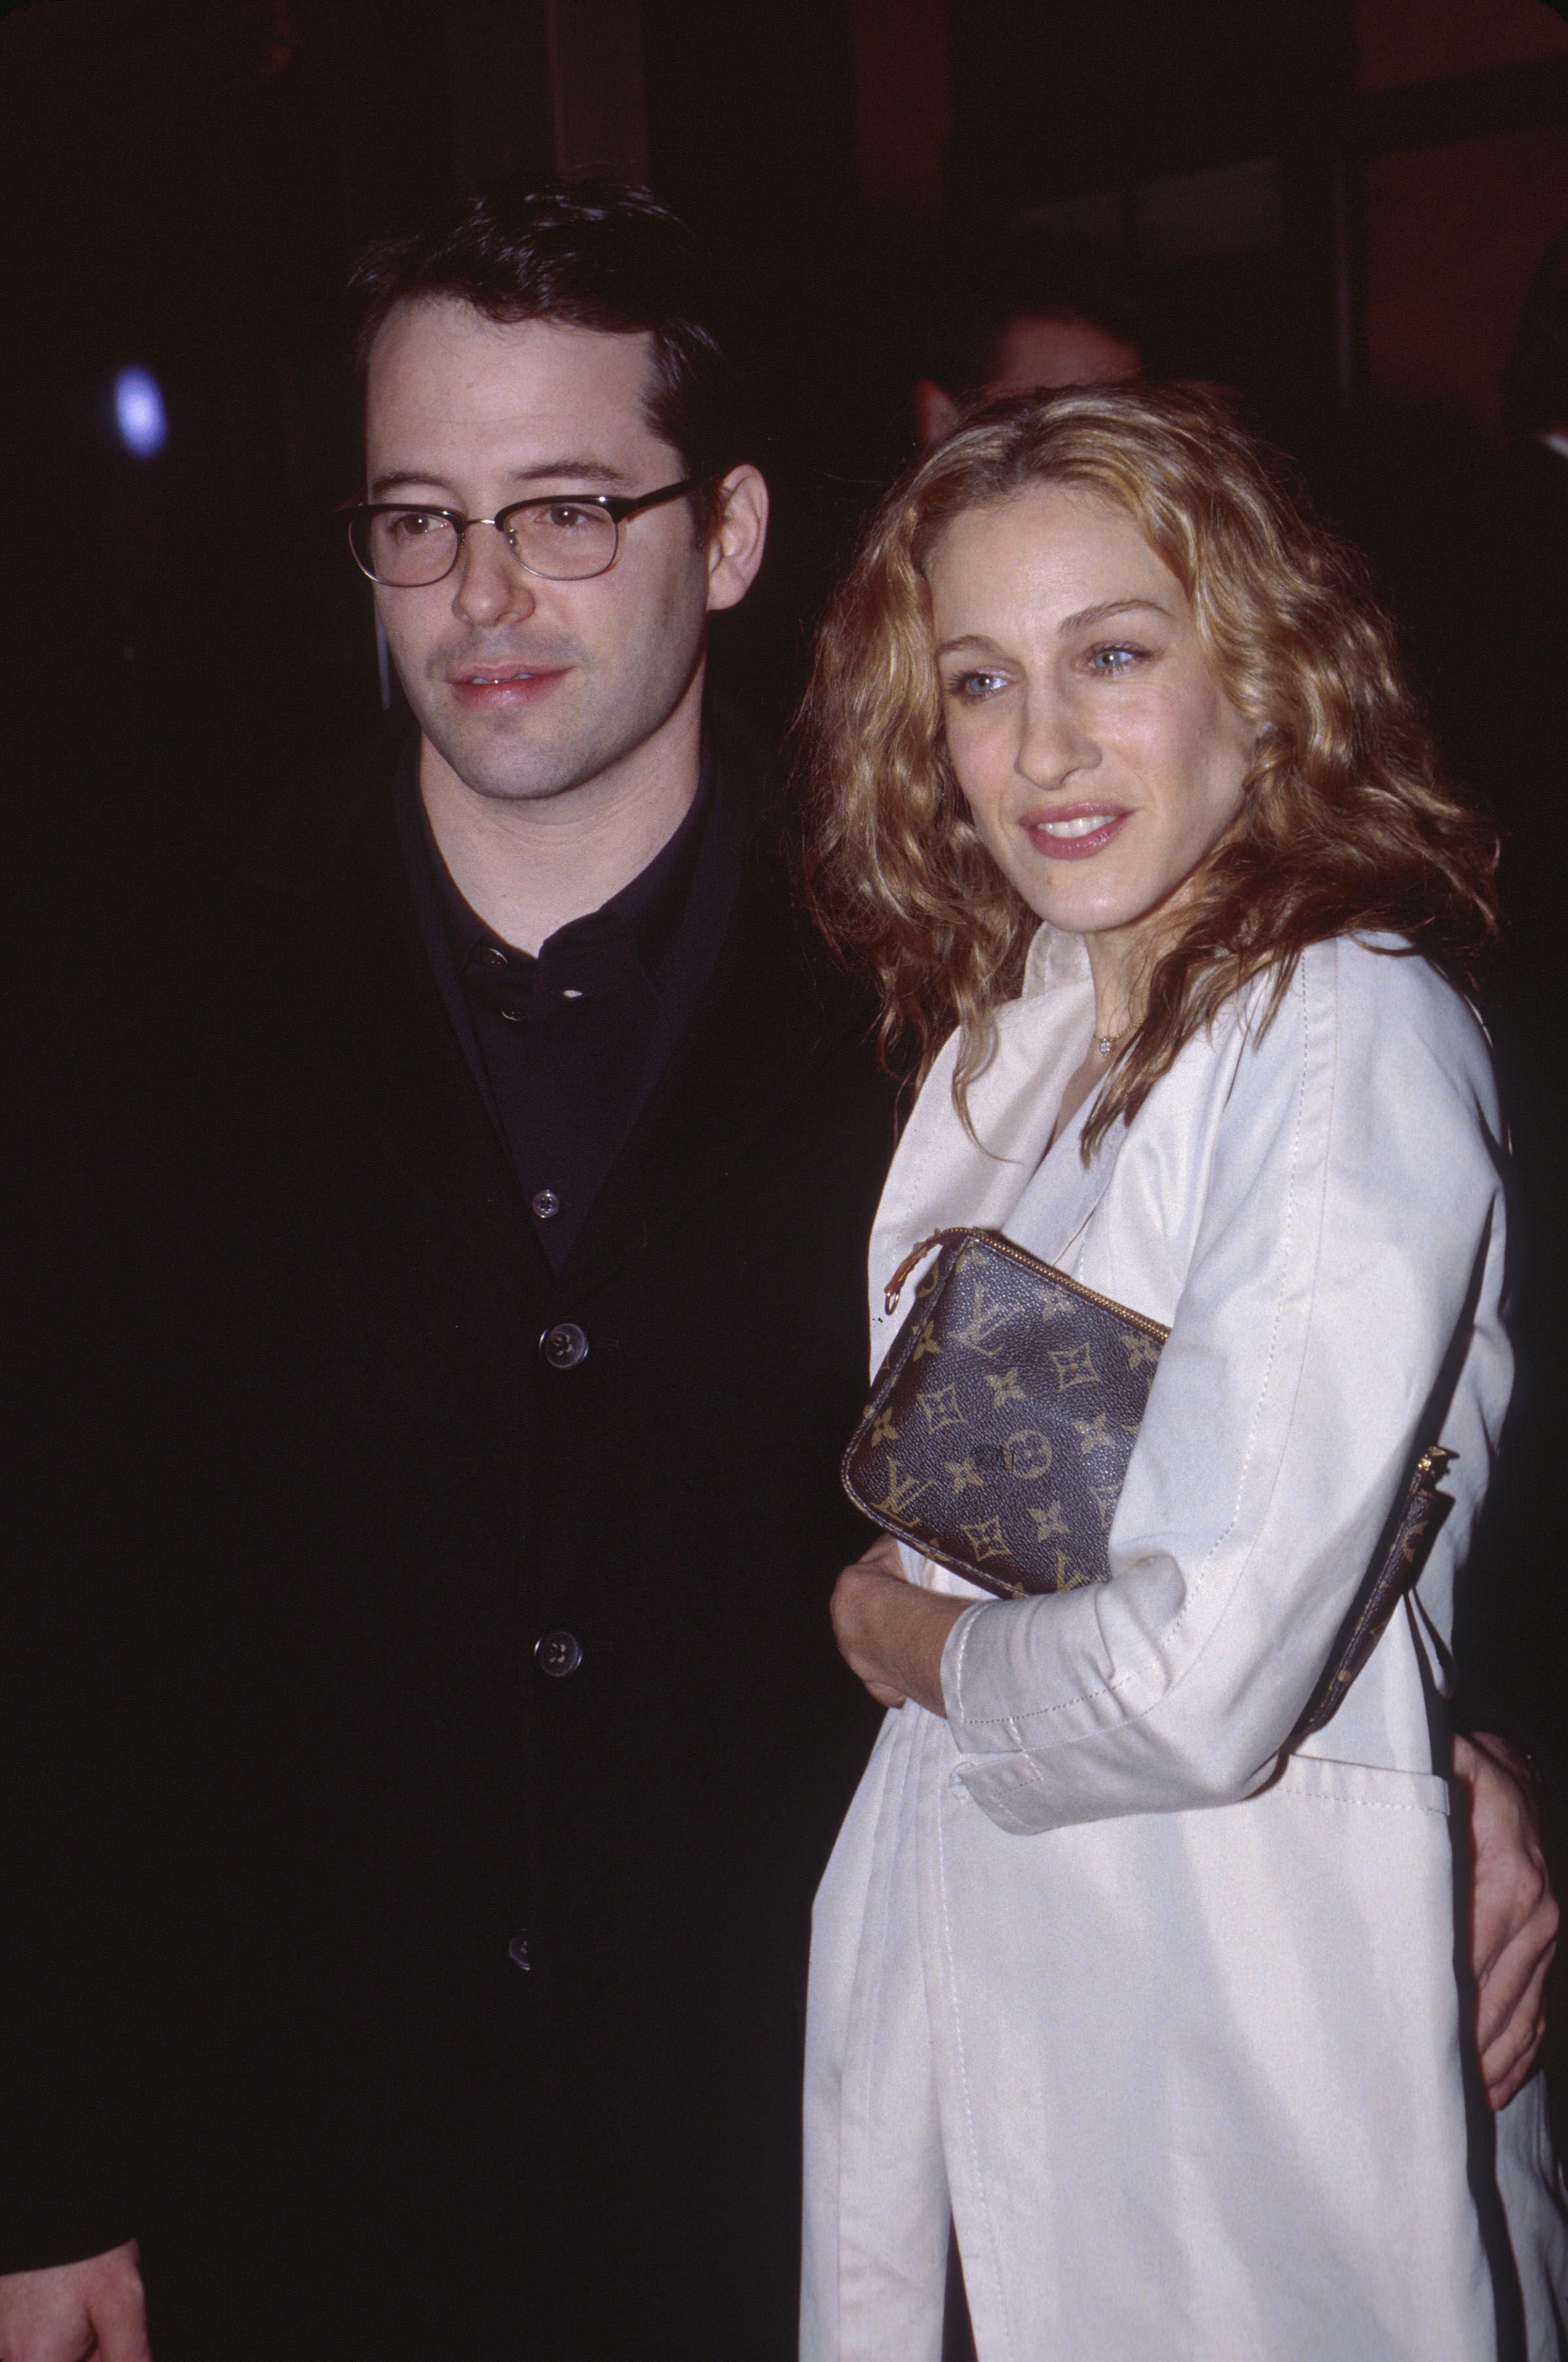 Matthew Broderick and Sarah Jessica Parker at the premiere of "The Sopranos." | Source: Getty Images